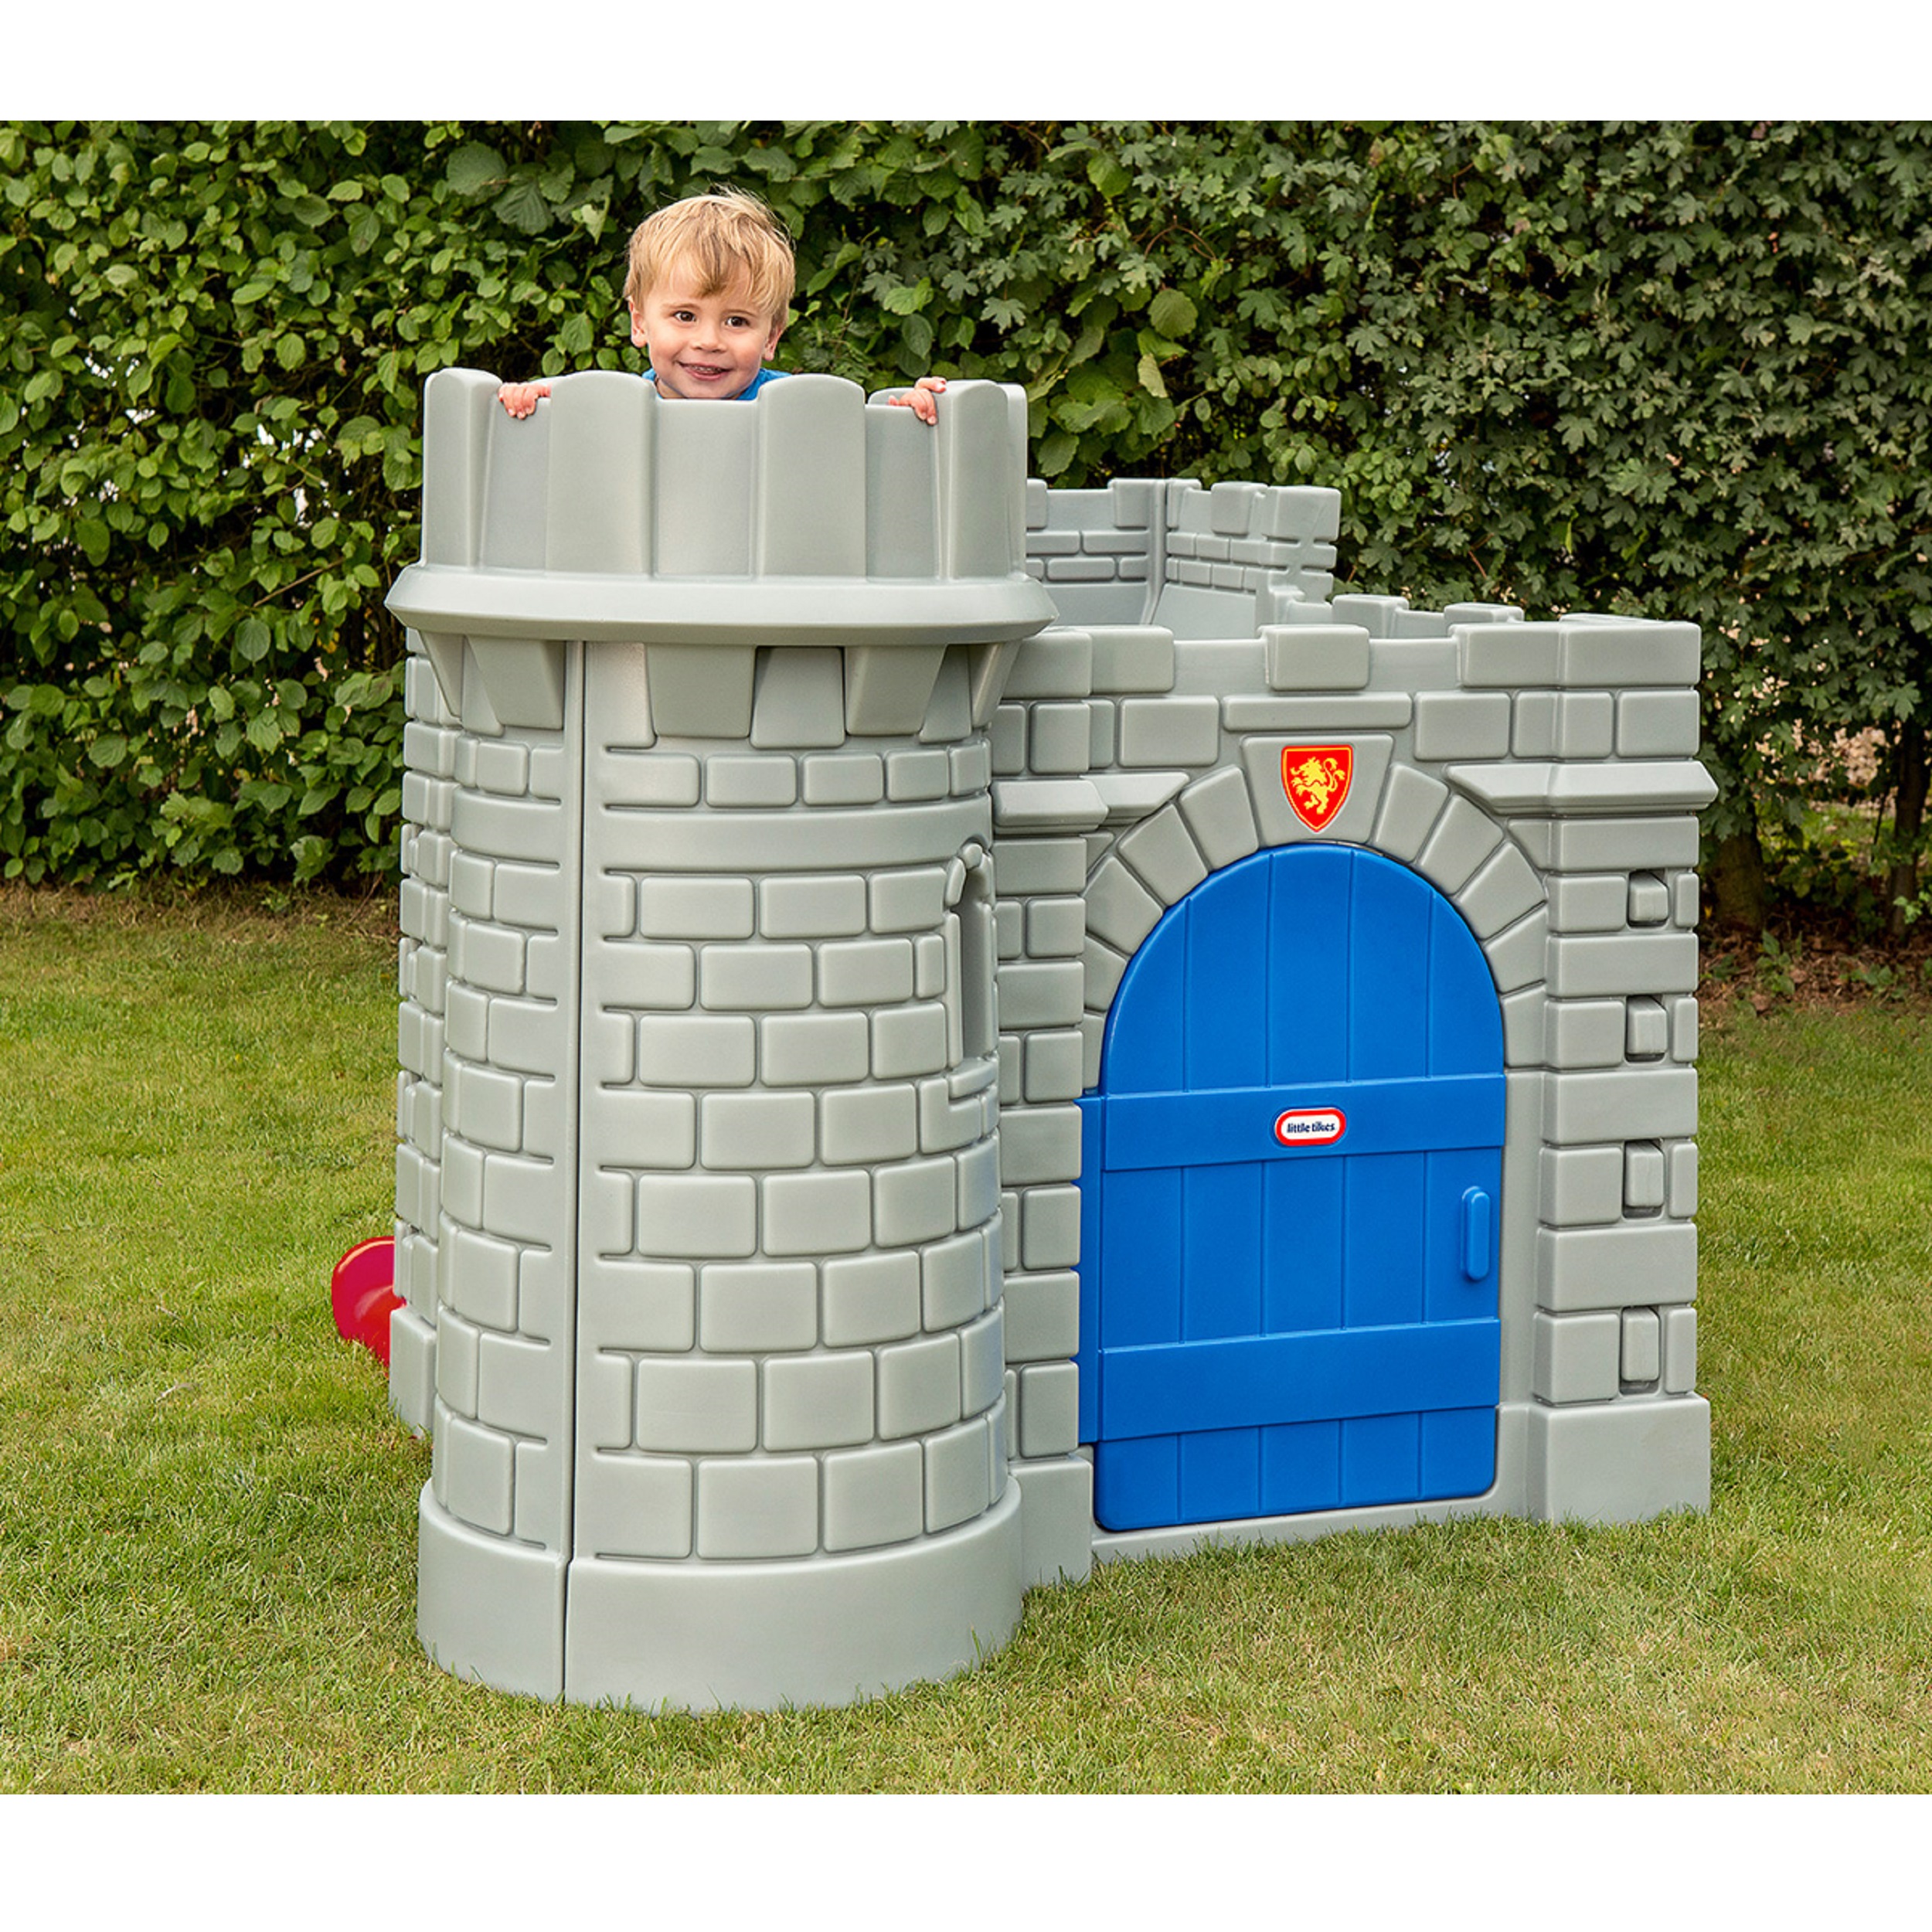 Little Tikes Classic Castle Jungle Gym Playhouse - image 5 of 6